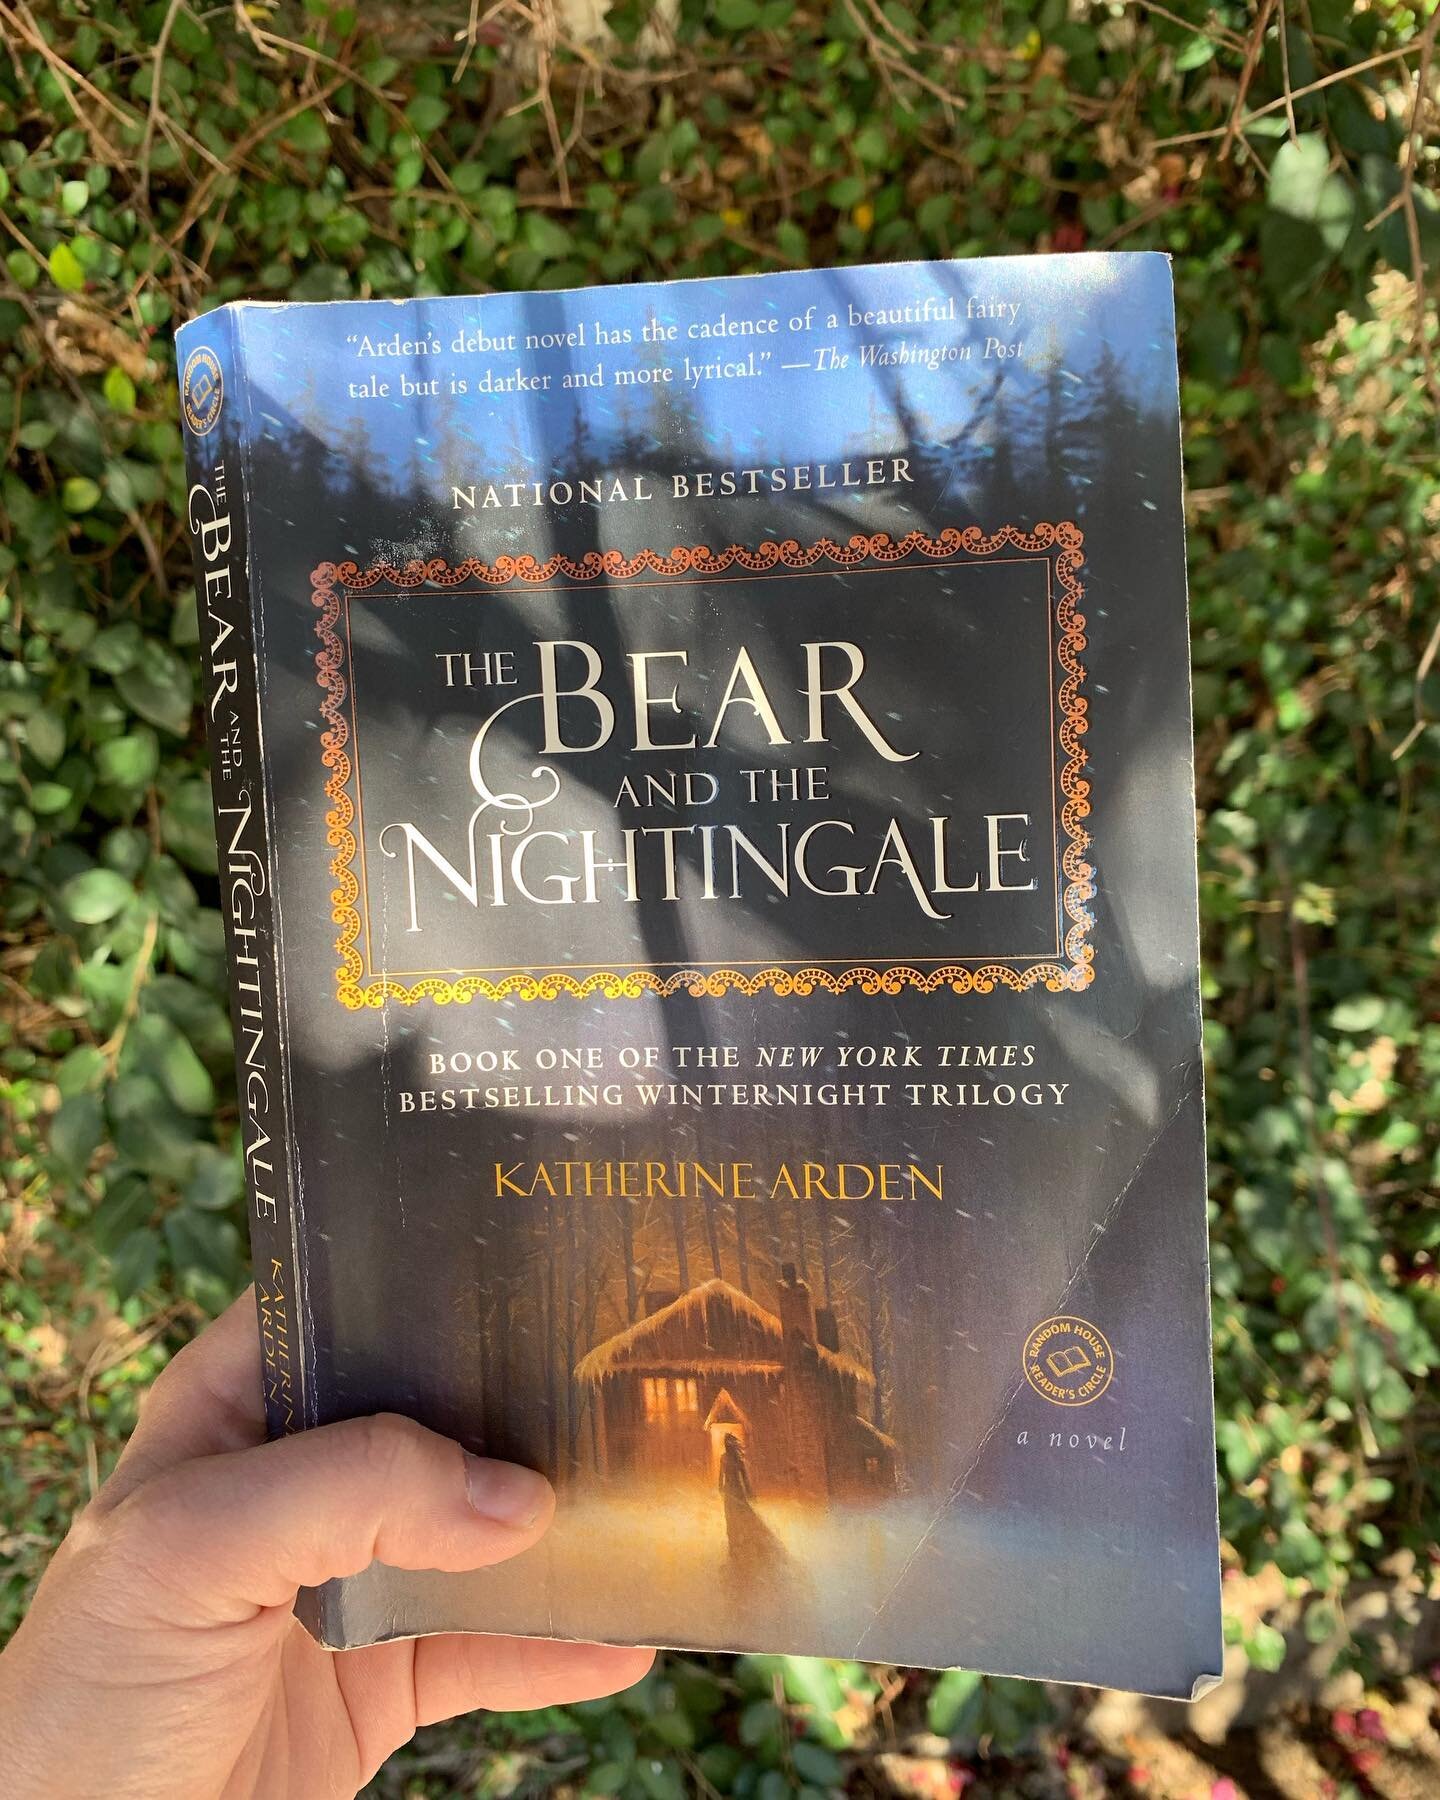 Just learned that I&rsquo;m reading #thebearandthenightingale where much of it was written! Coincidence or magic? 💎🧙&zwj;♀️🪆